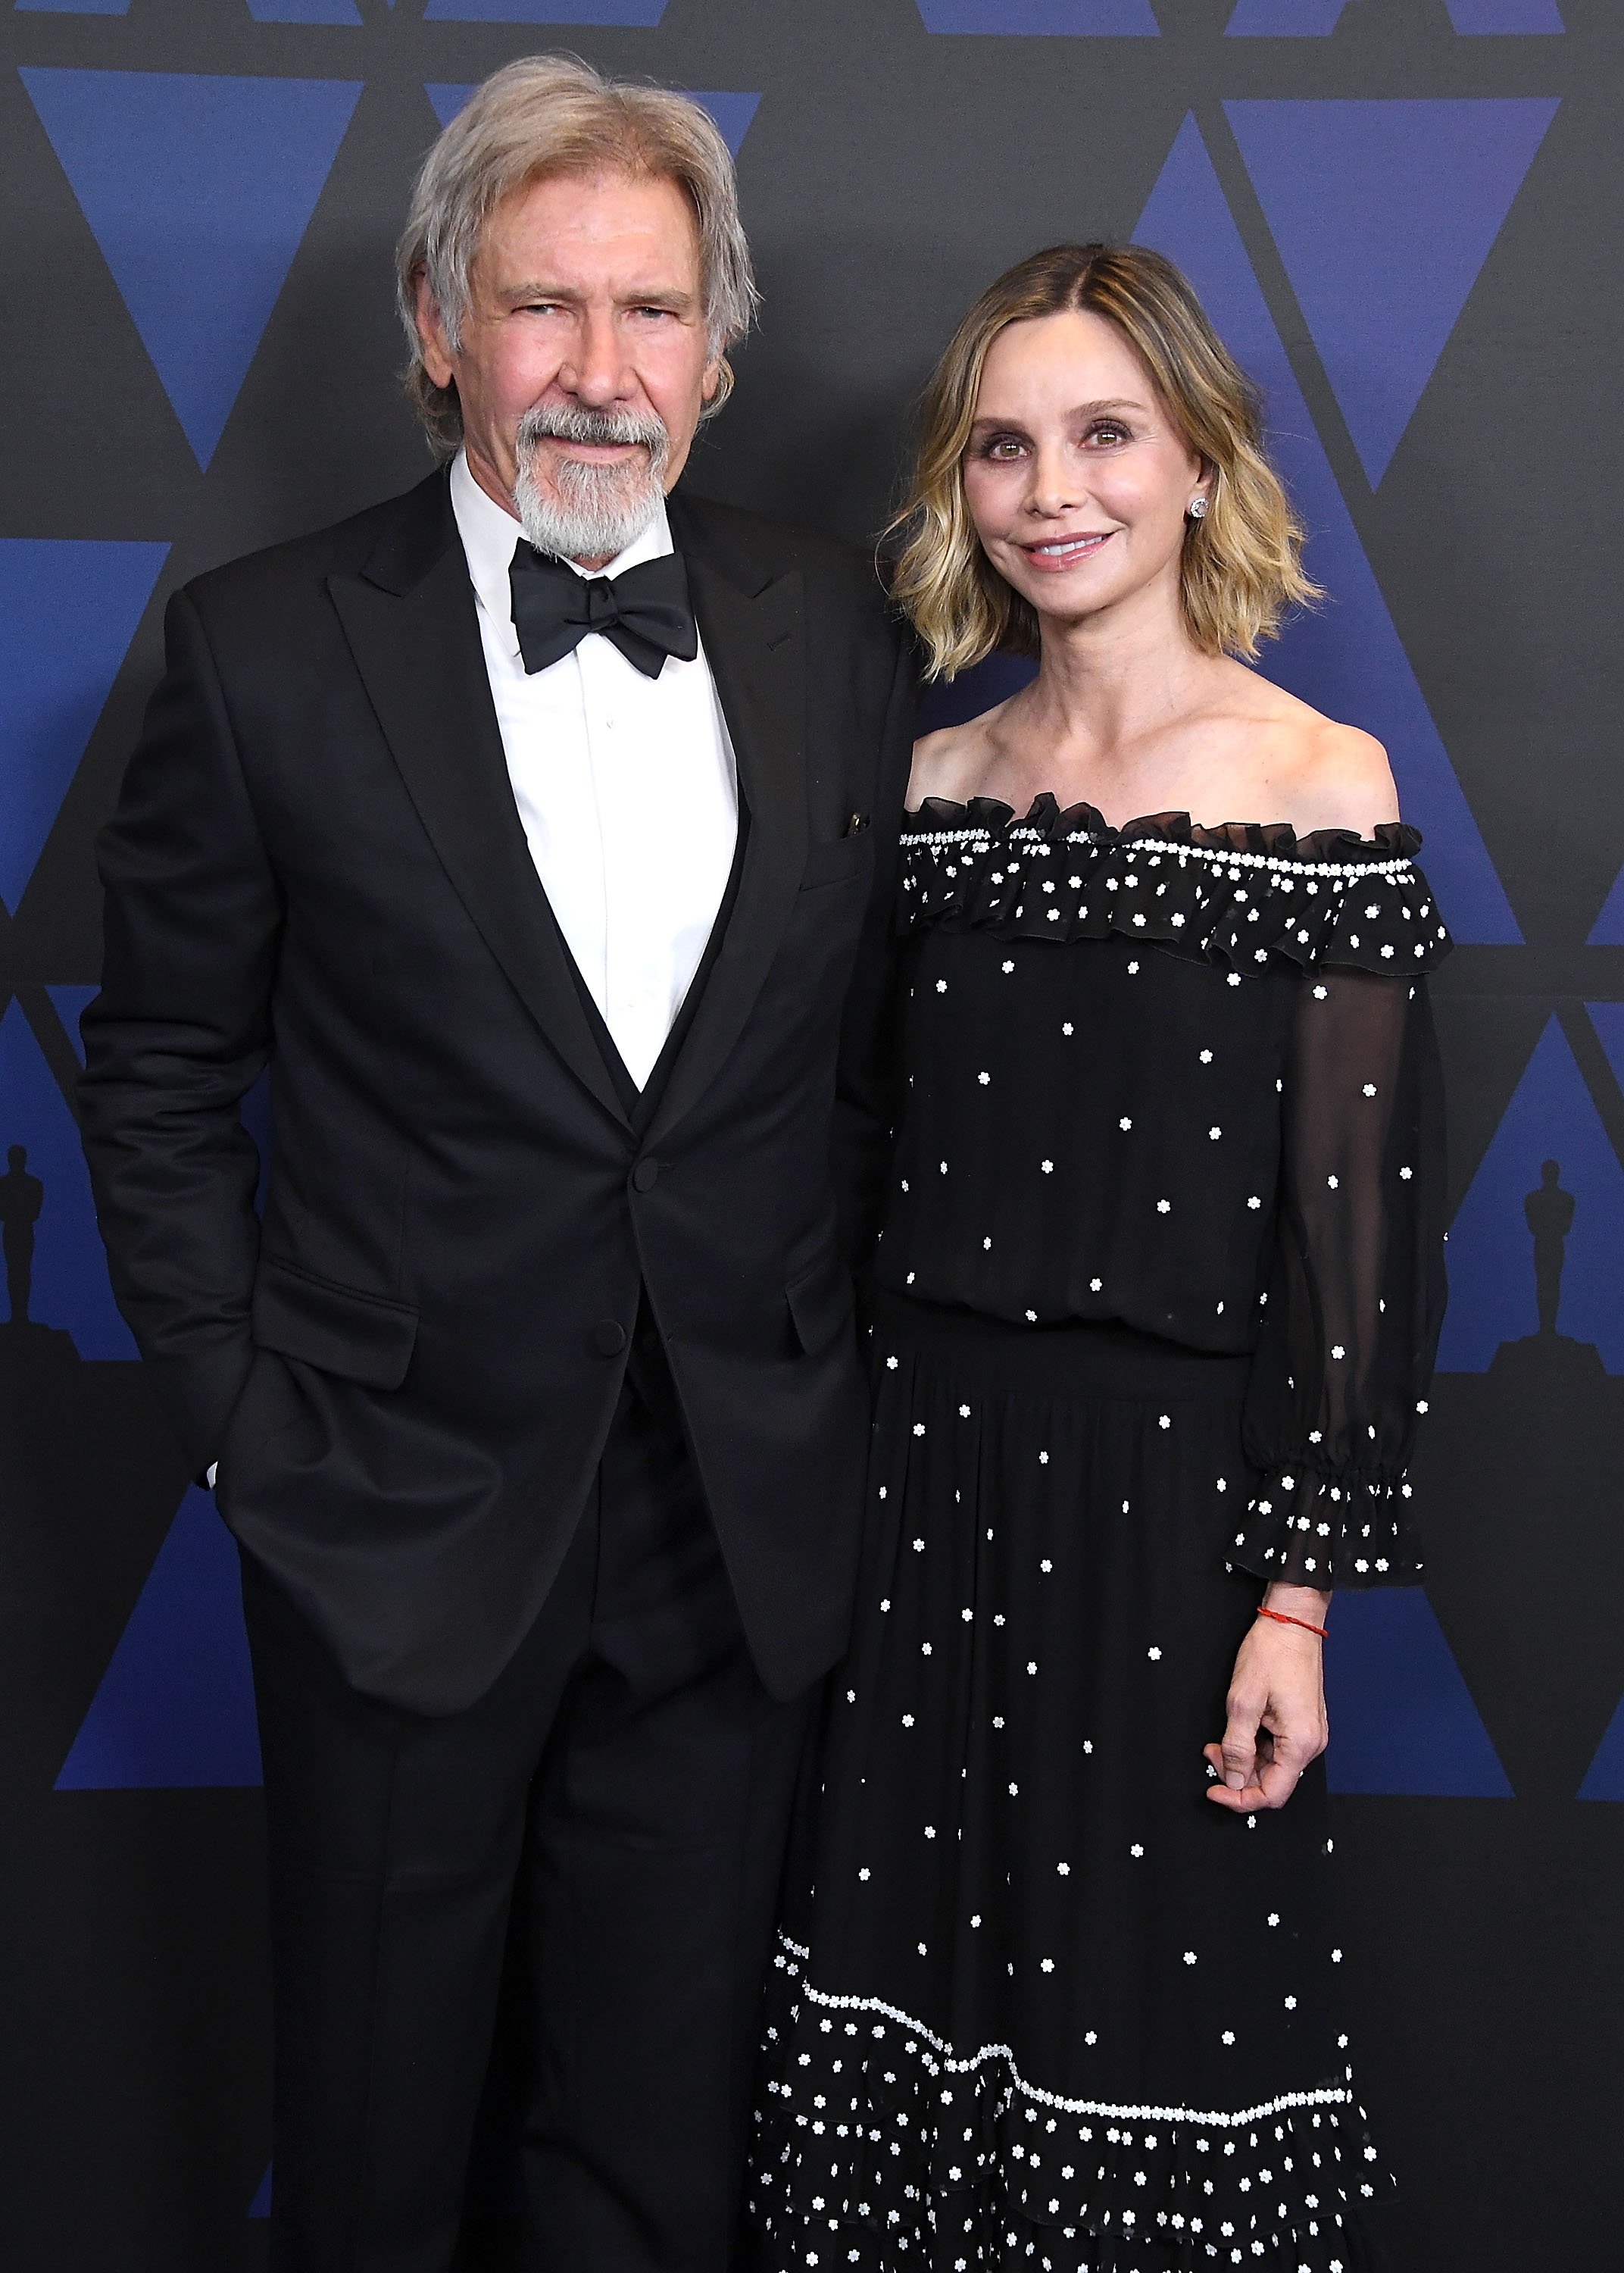 Harrison Ford and Calista Flockhart on November 18, 2018 in Hollywood, California | Source: Getty Images